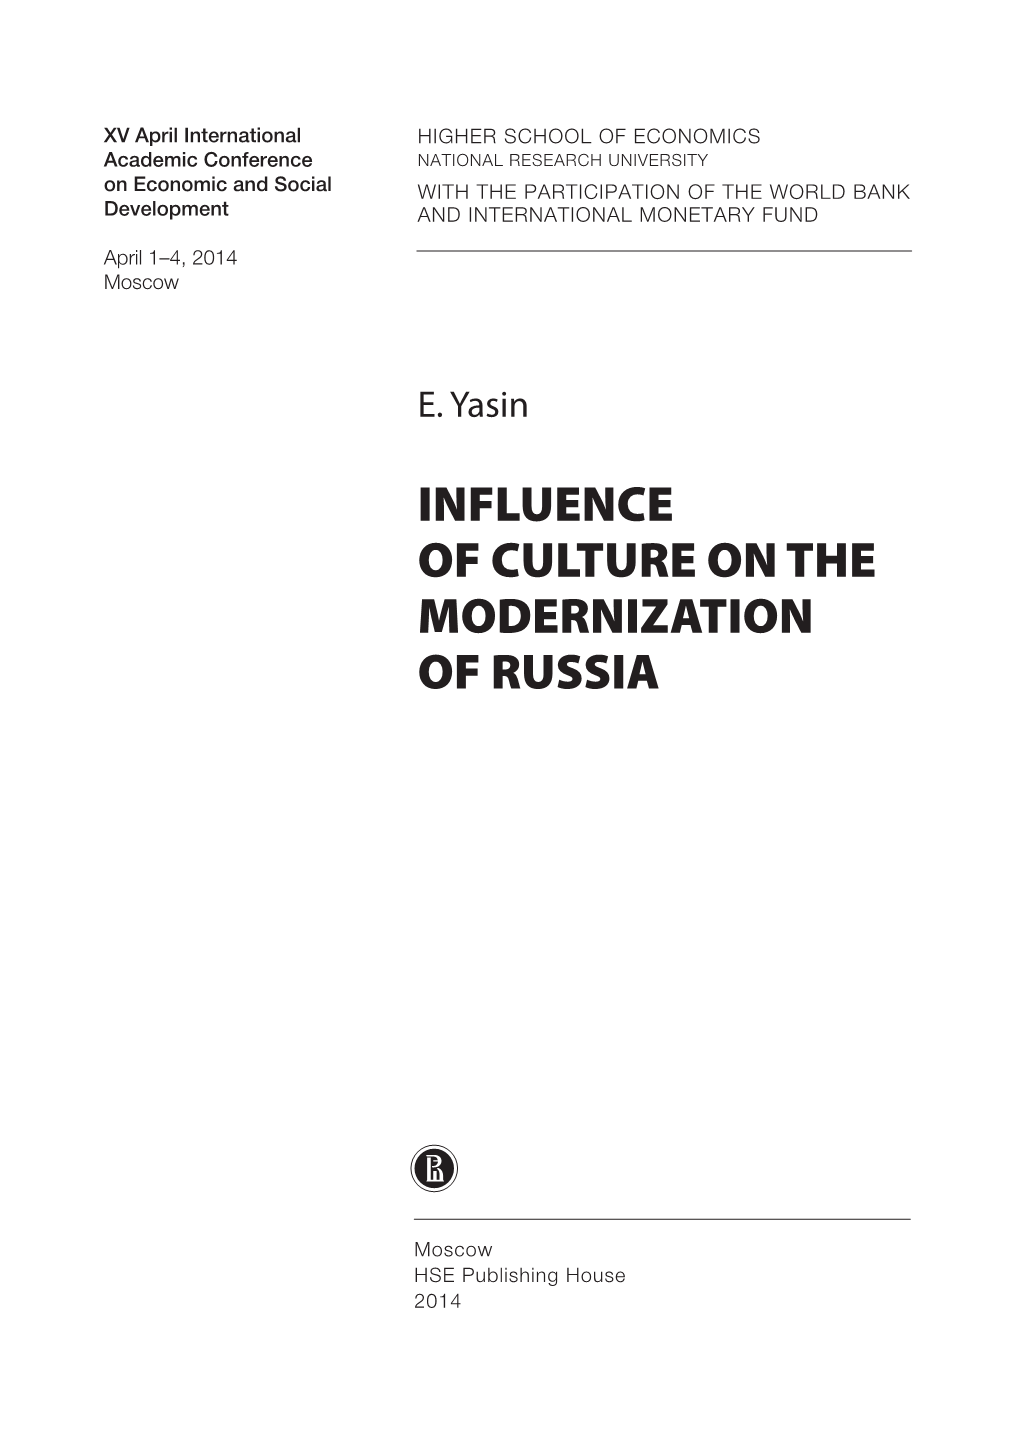 Influence of Culture on the Modernization of Russia